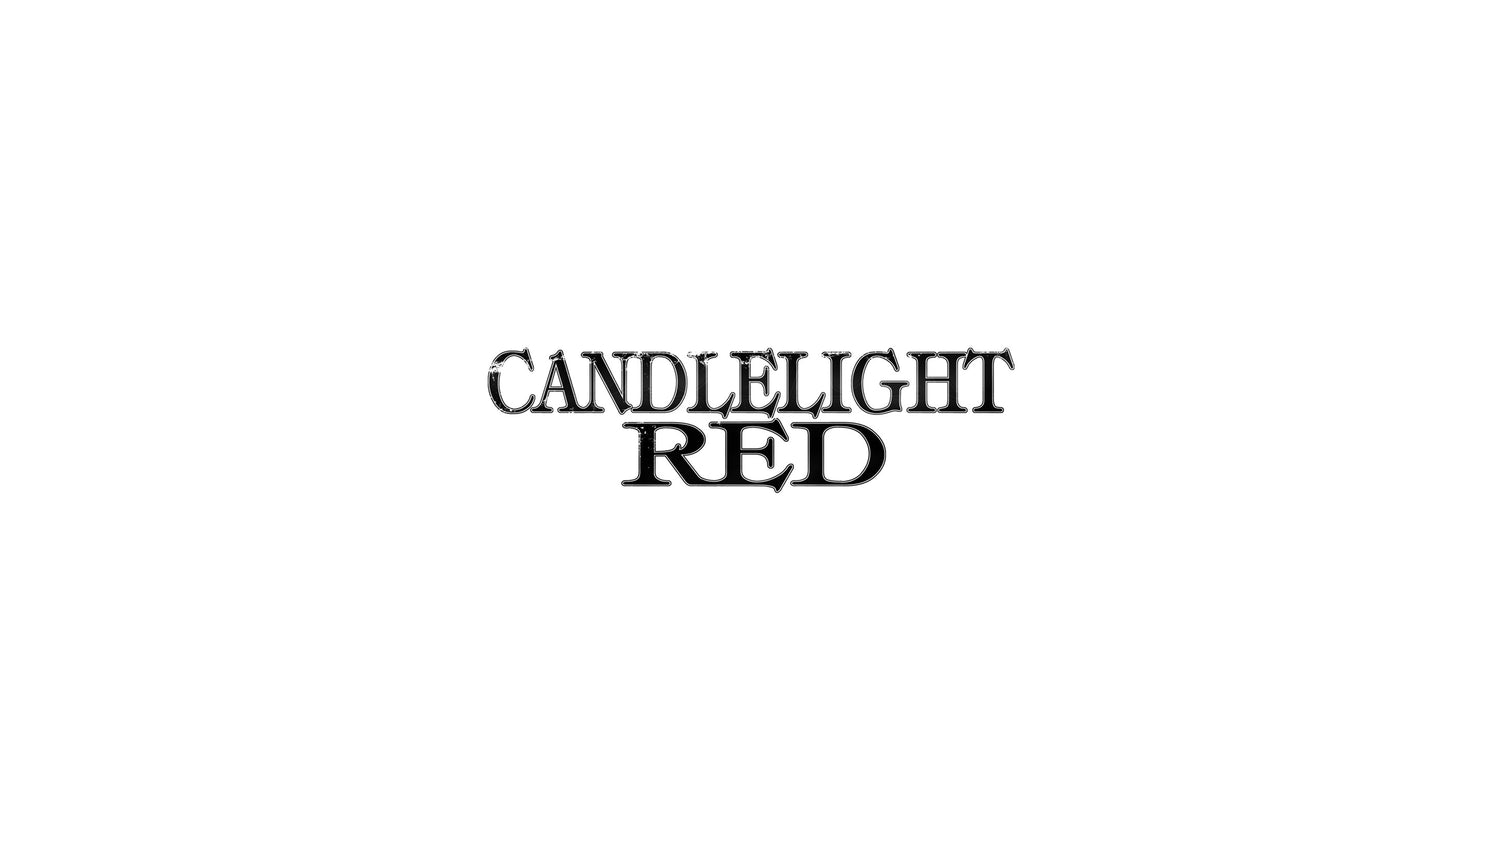 CANDLELIGHT RED